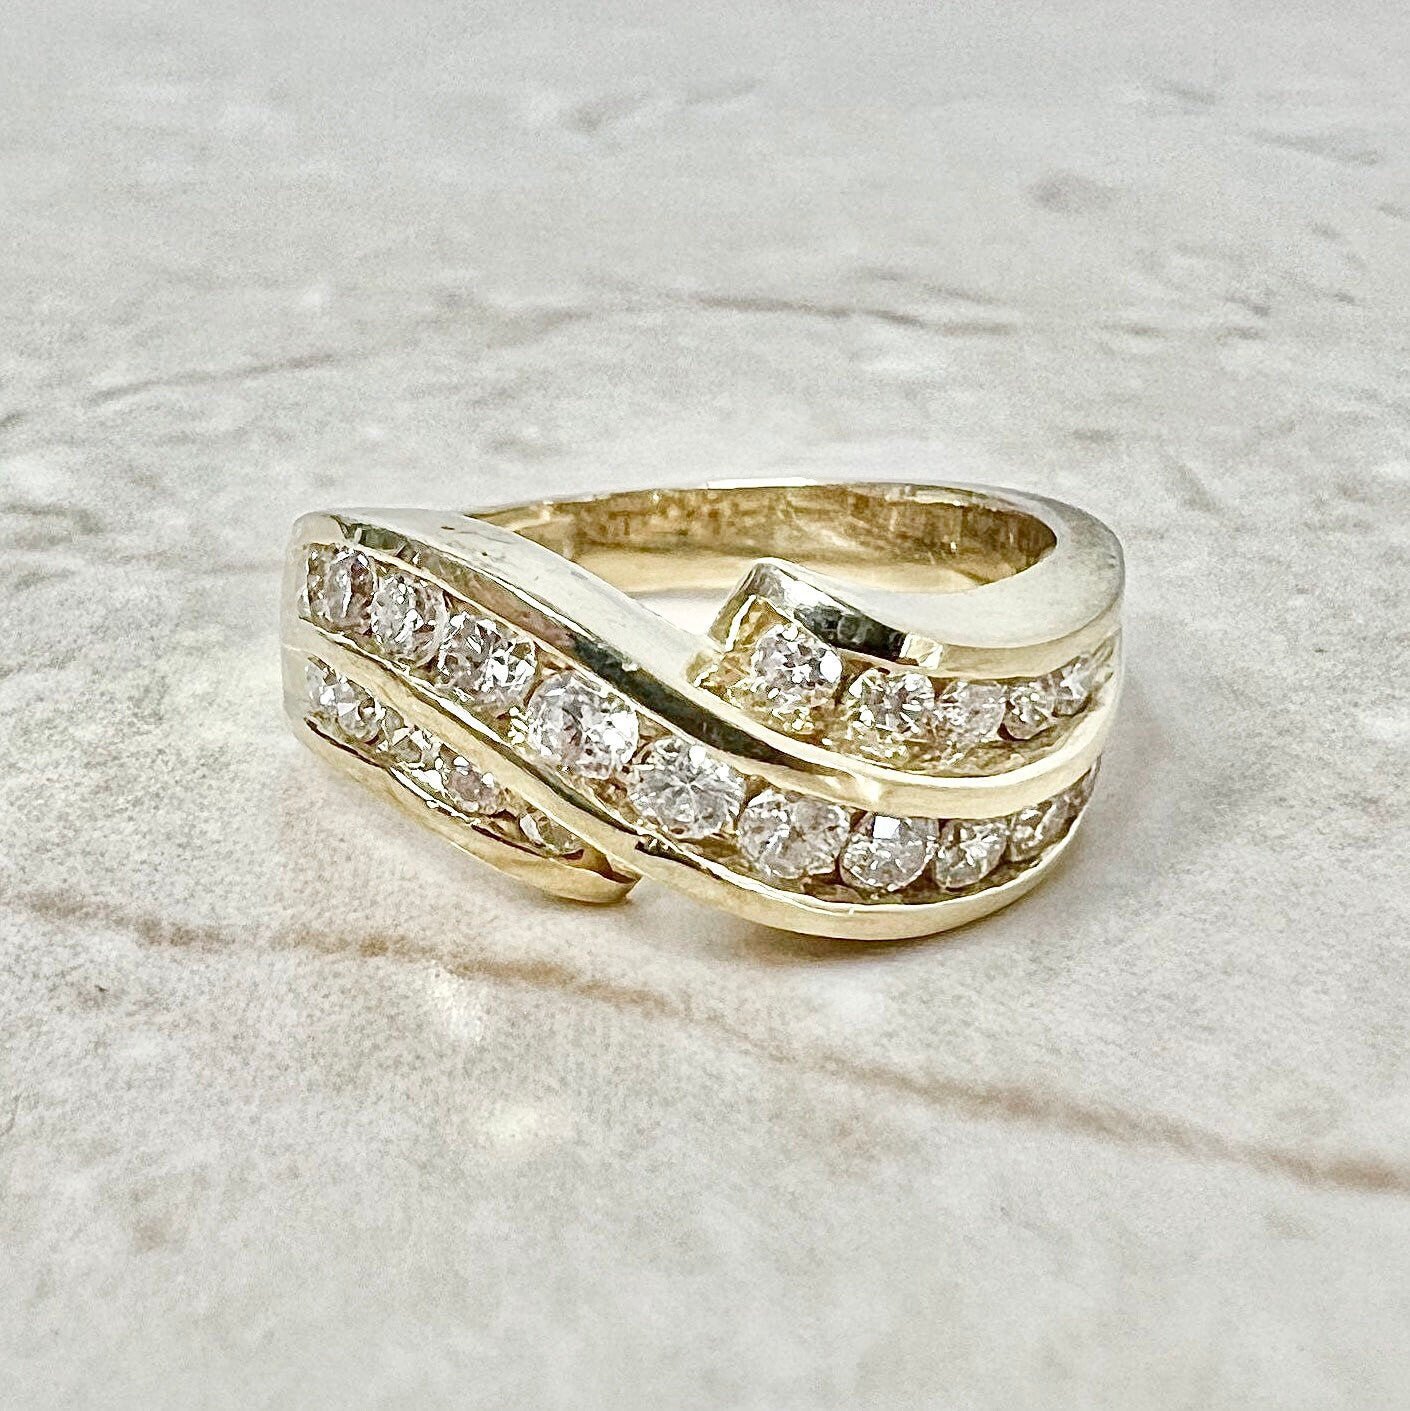 Vintage 14K Diamond Cocktail Band Ring - Yellow Gold Diamond Ring - Wedding Ring - Birthday Gift For Her - Best Gift - Holiday Gift